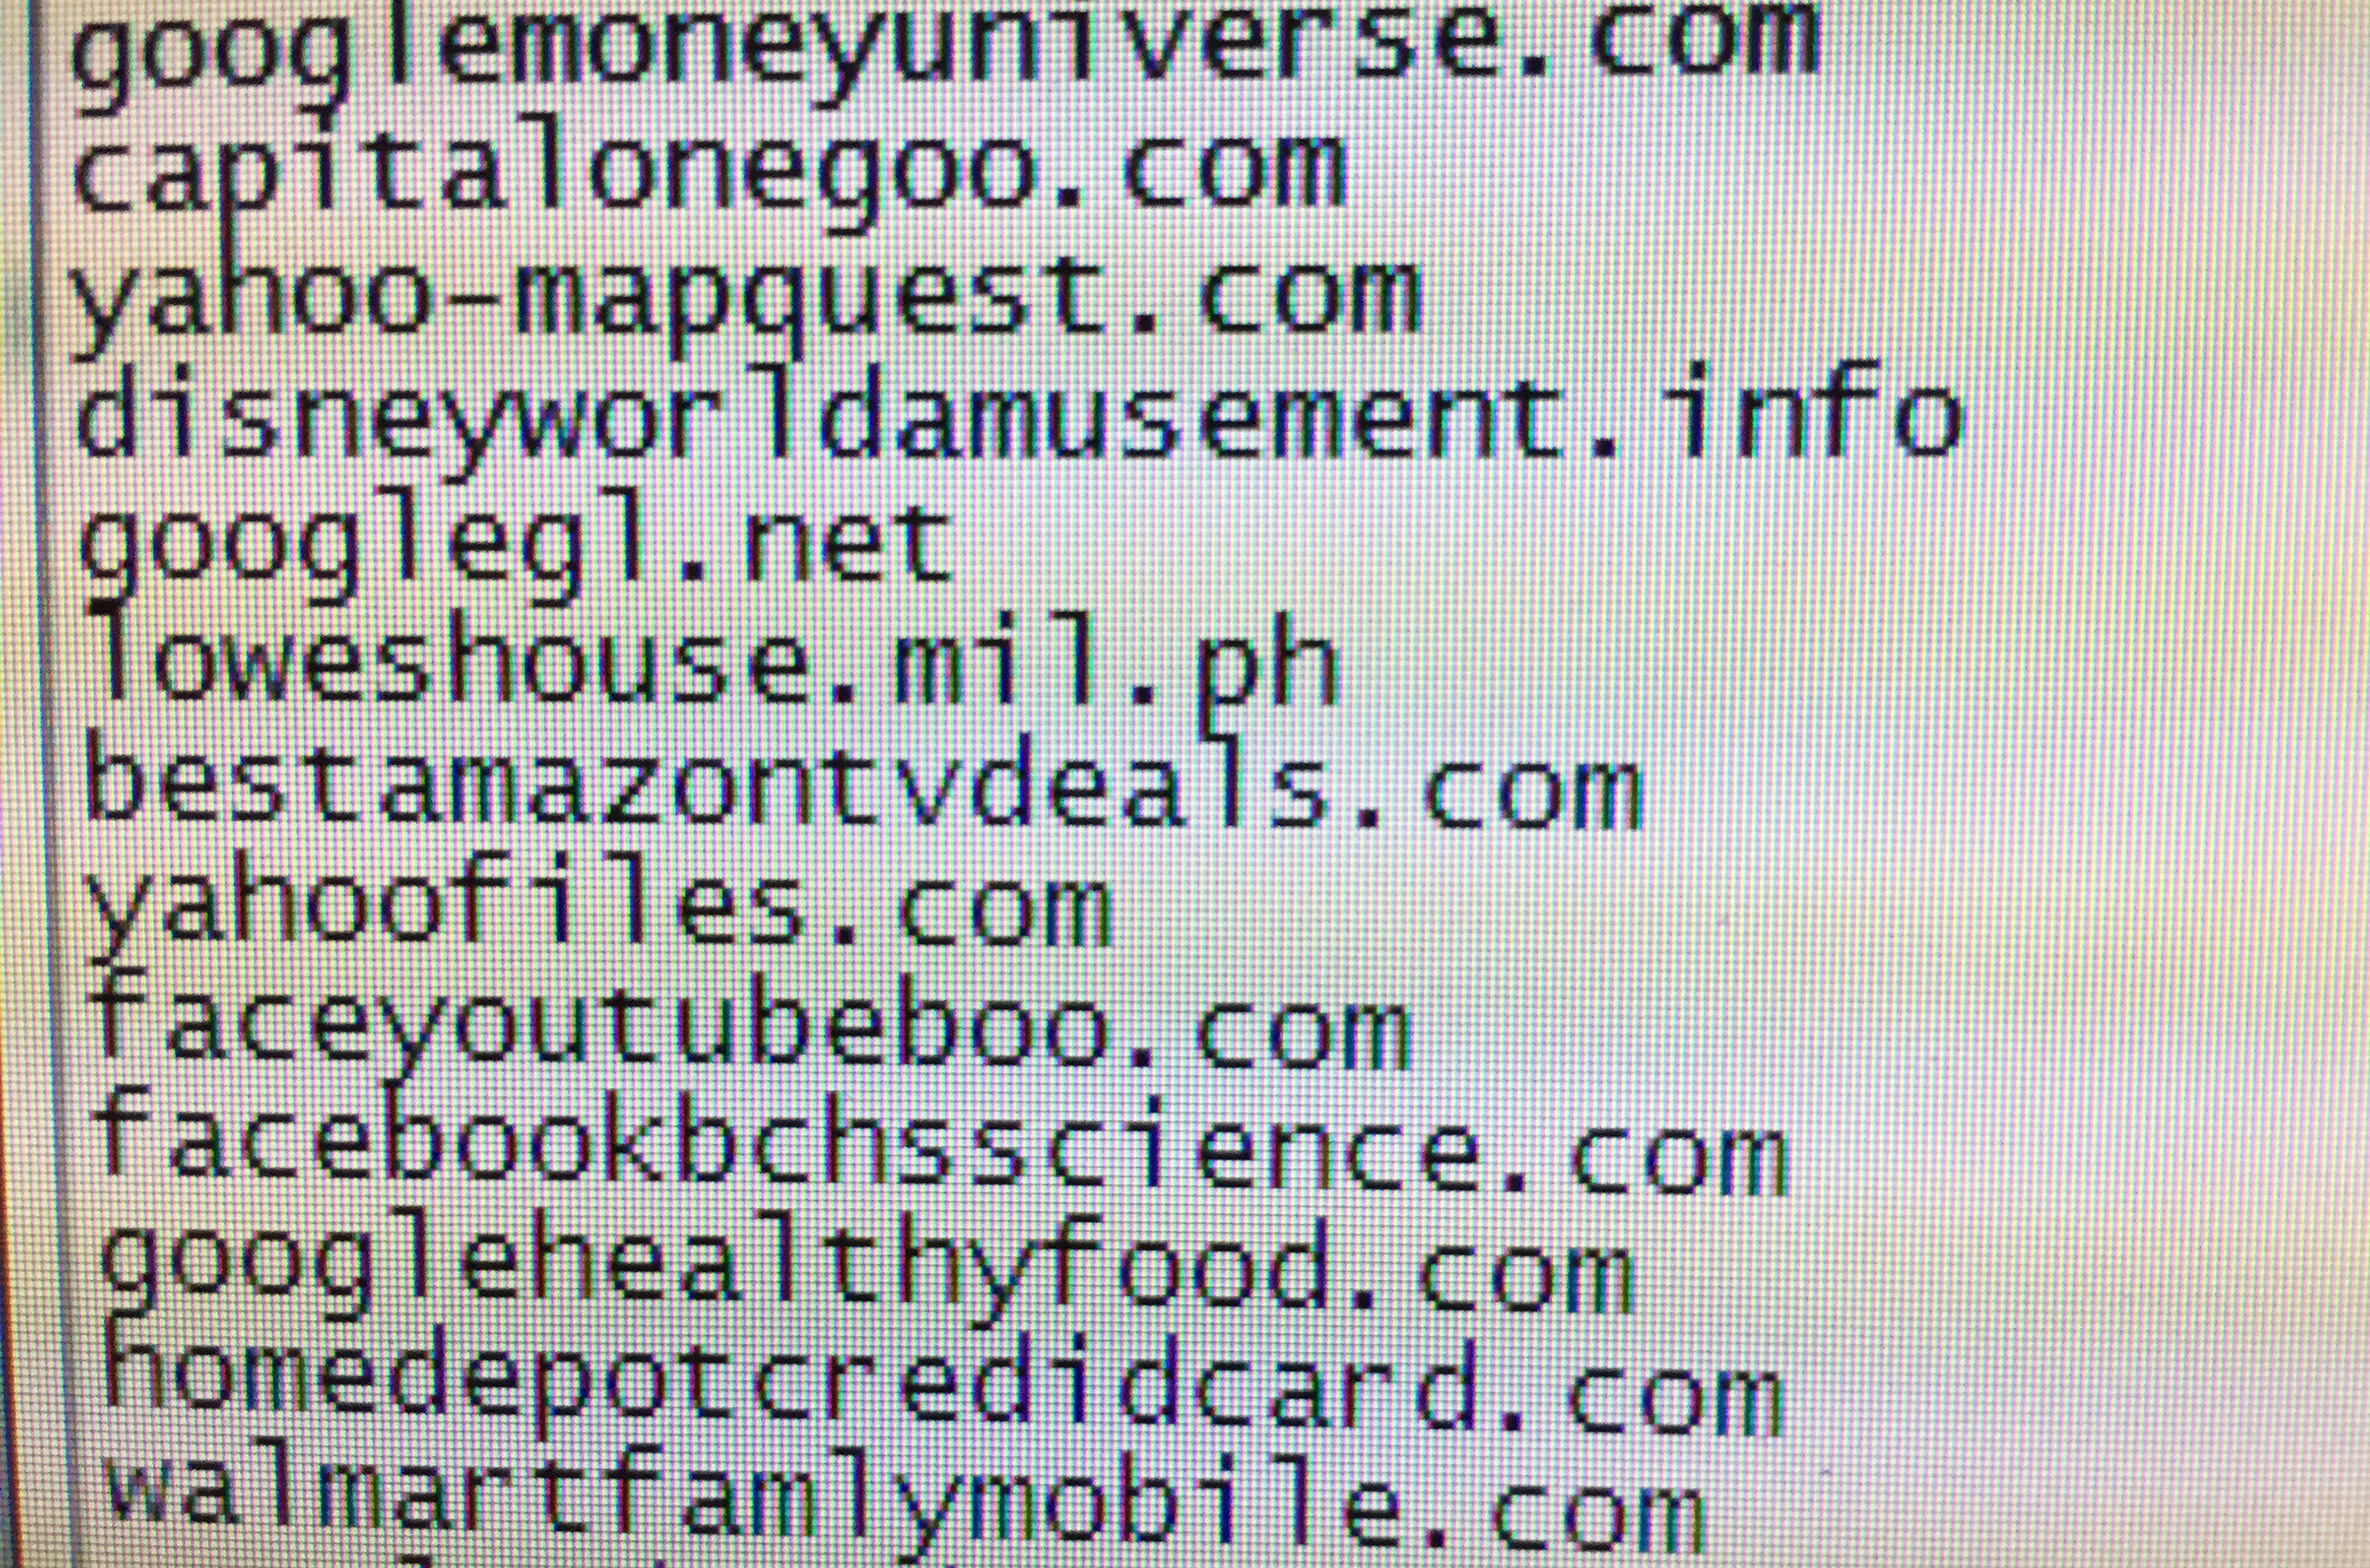 A selection of combosquatting domains identified during the study. The domain names include a trademarked name, plus an additional word or words.